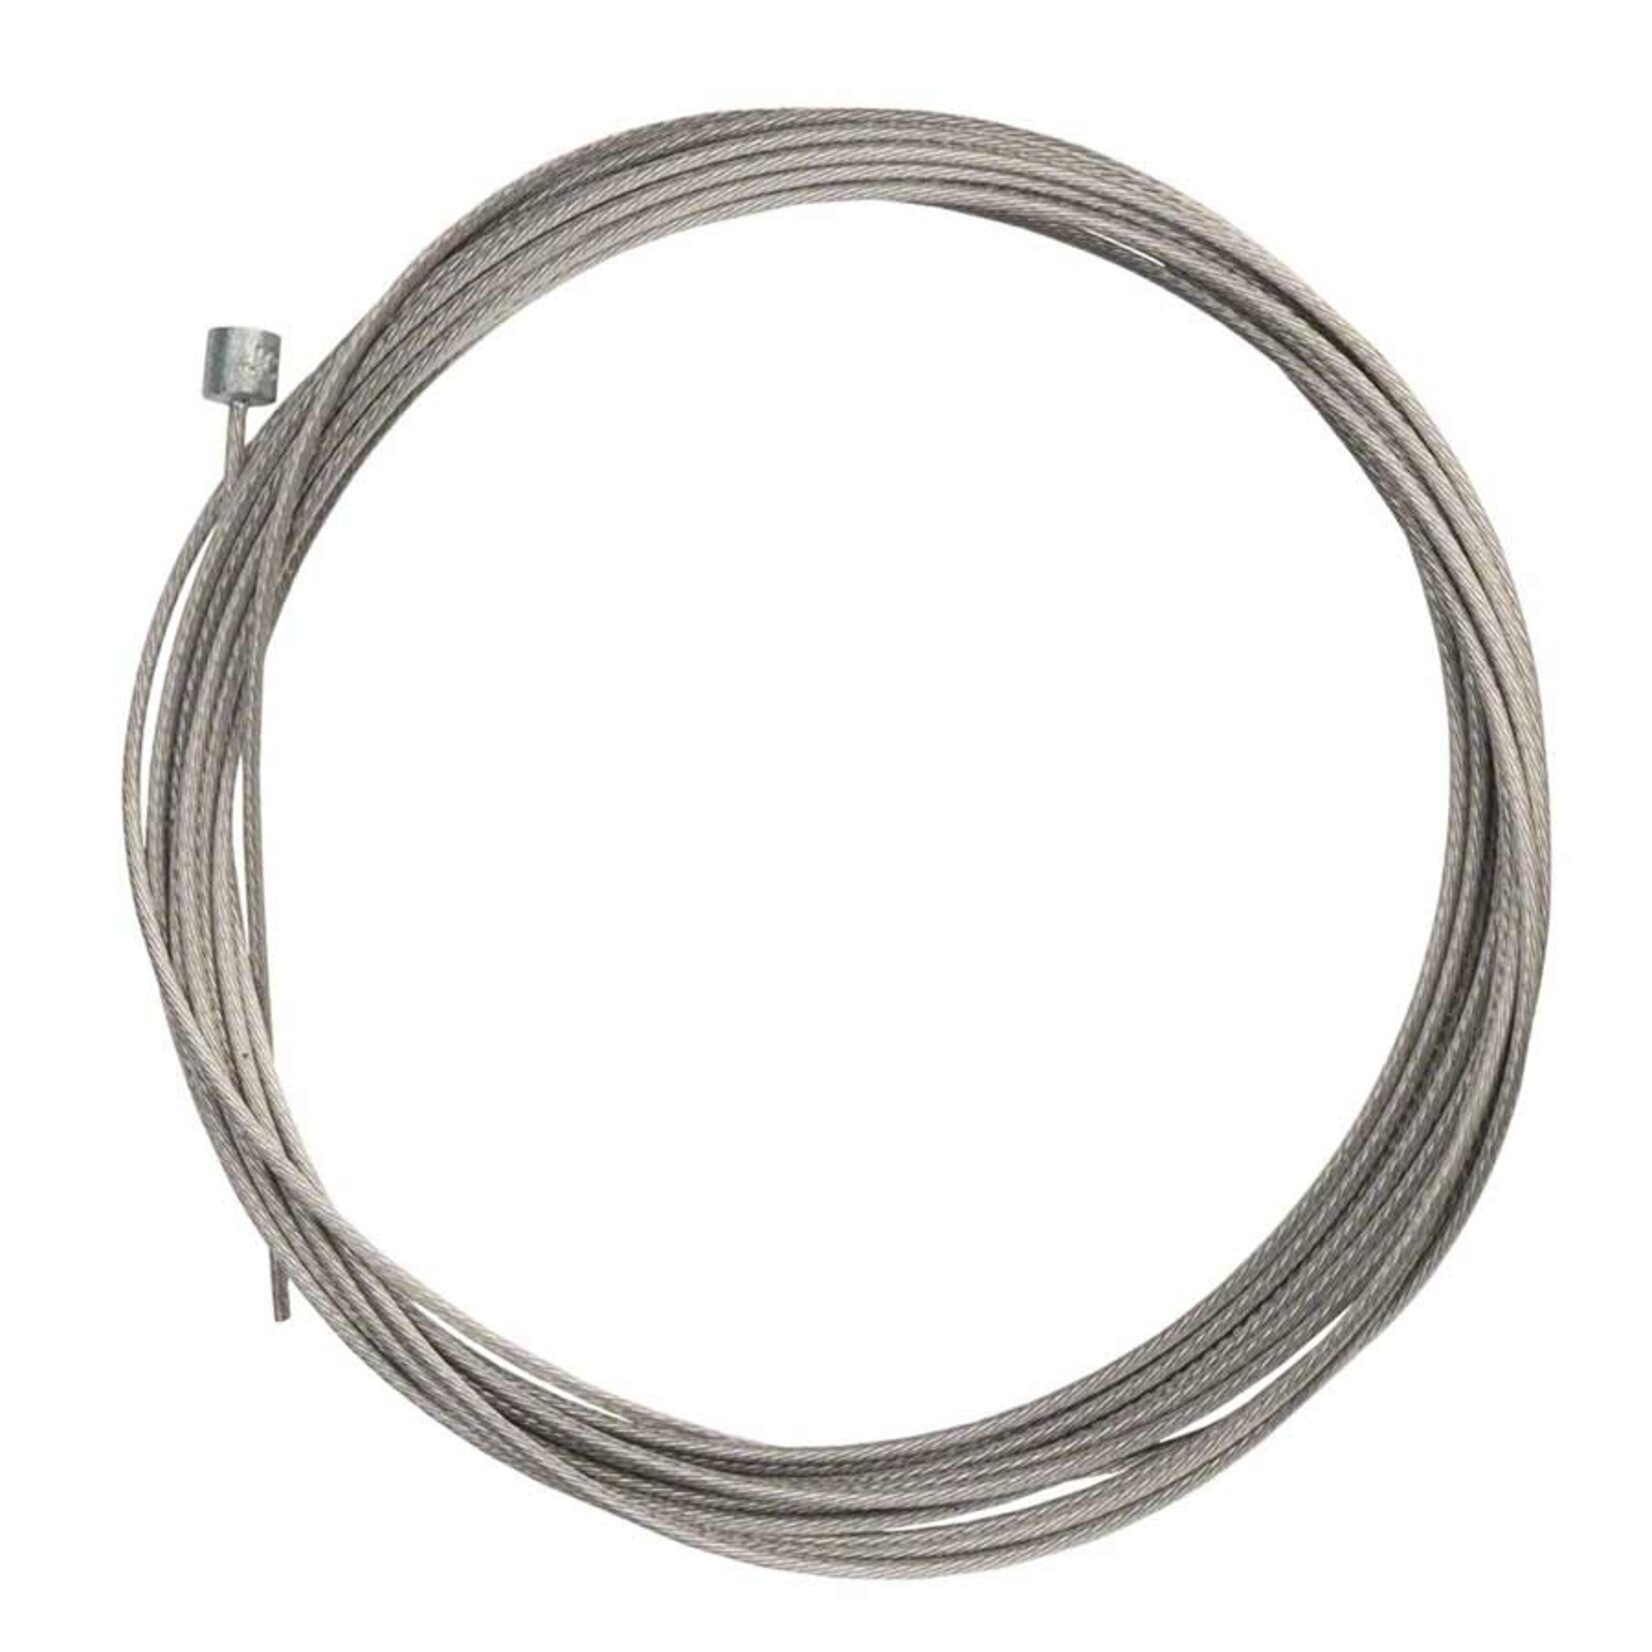 SRAM SRAM, Stainless Shift Cable, Shifter Cable, 1.1mm, 3100mm, Shimano/SRAM